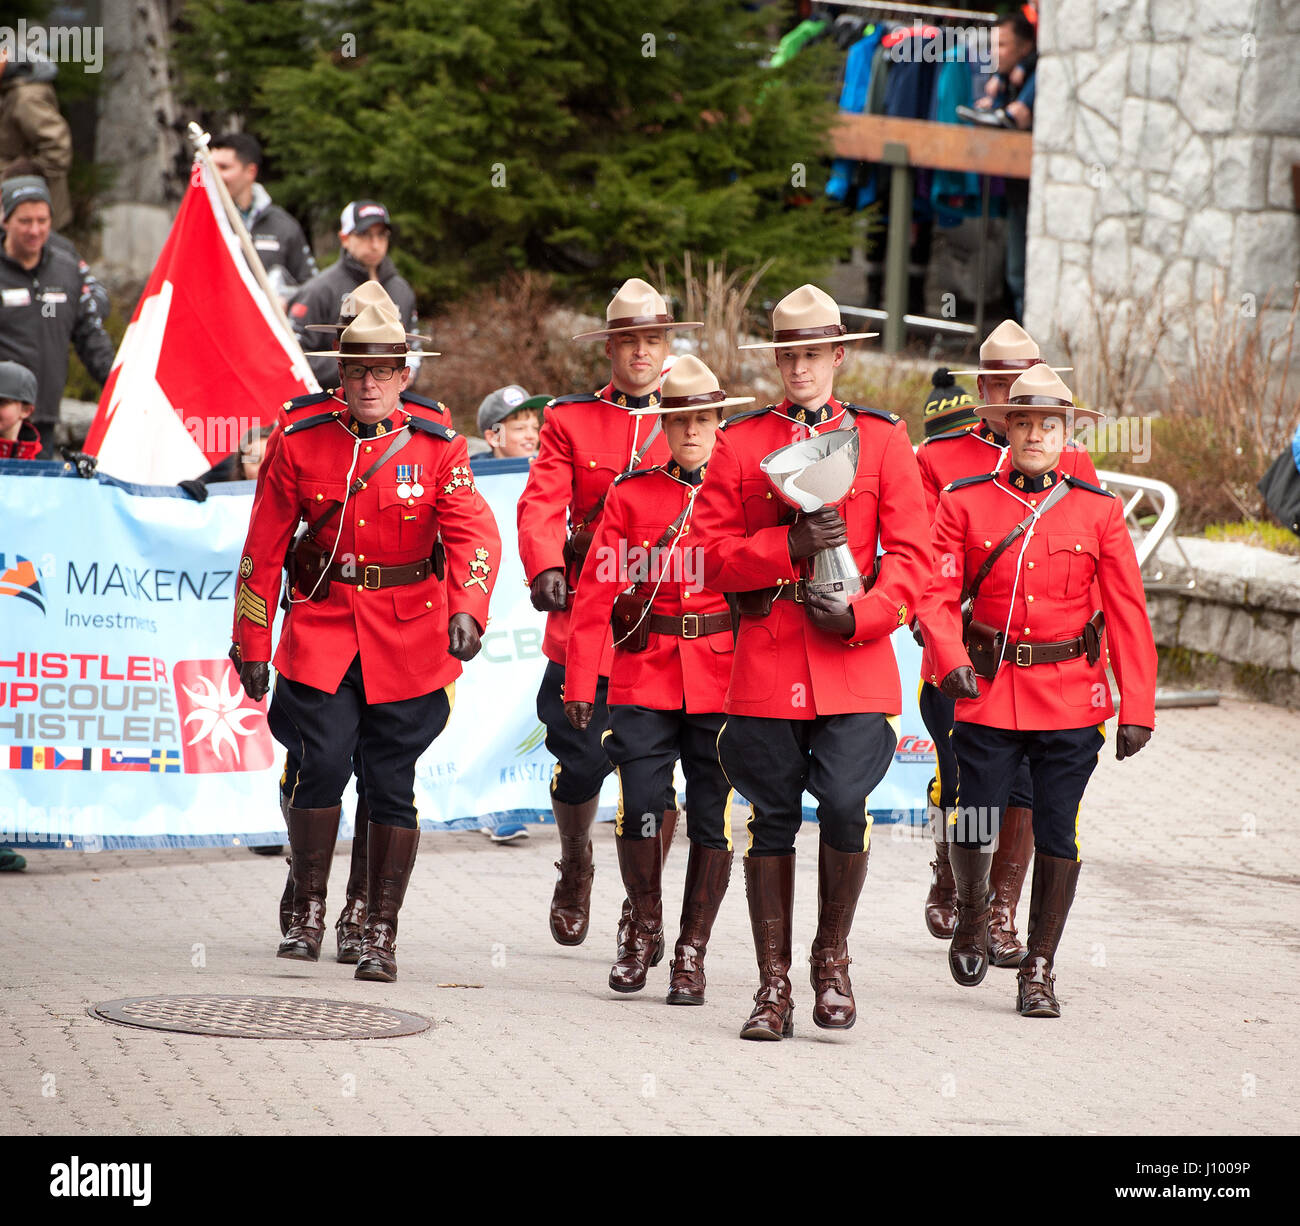 Royal Canadian Mounted Police, or RCMP officers in traditional dress red serge uniforms parade during the Canada Cup.  Whistler BC, Canada. Stock Photo